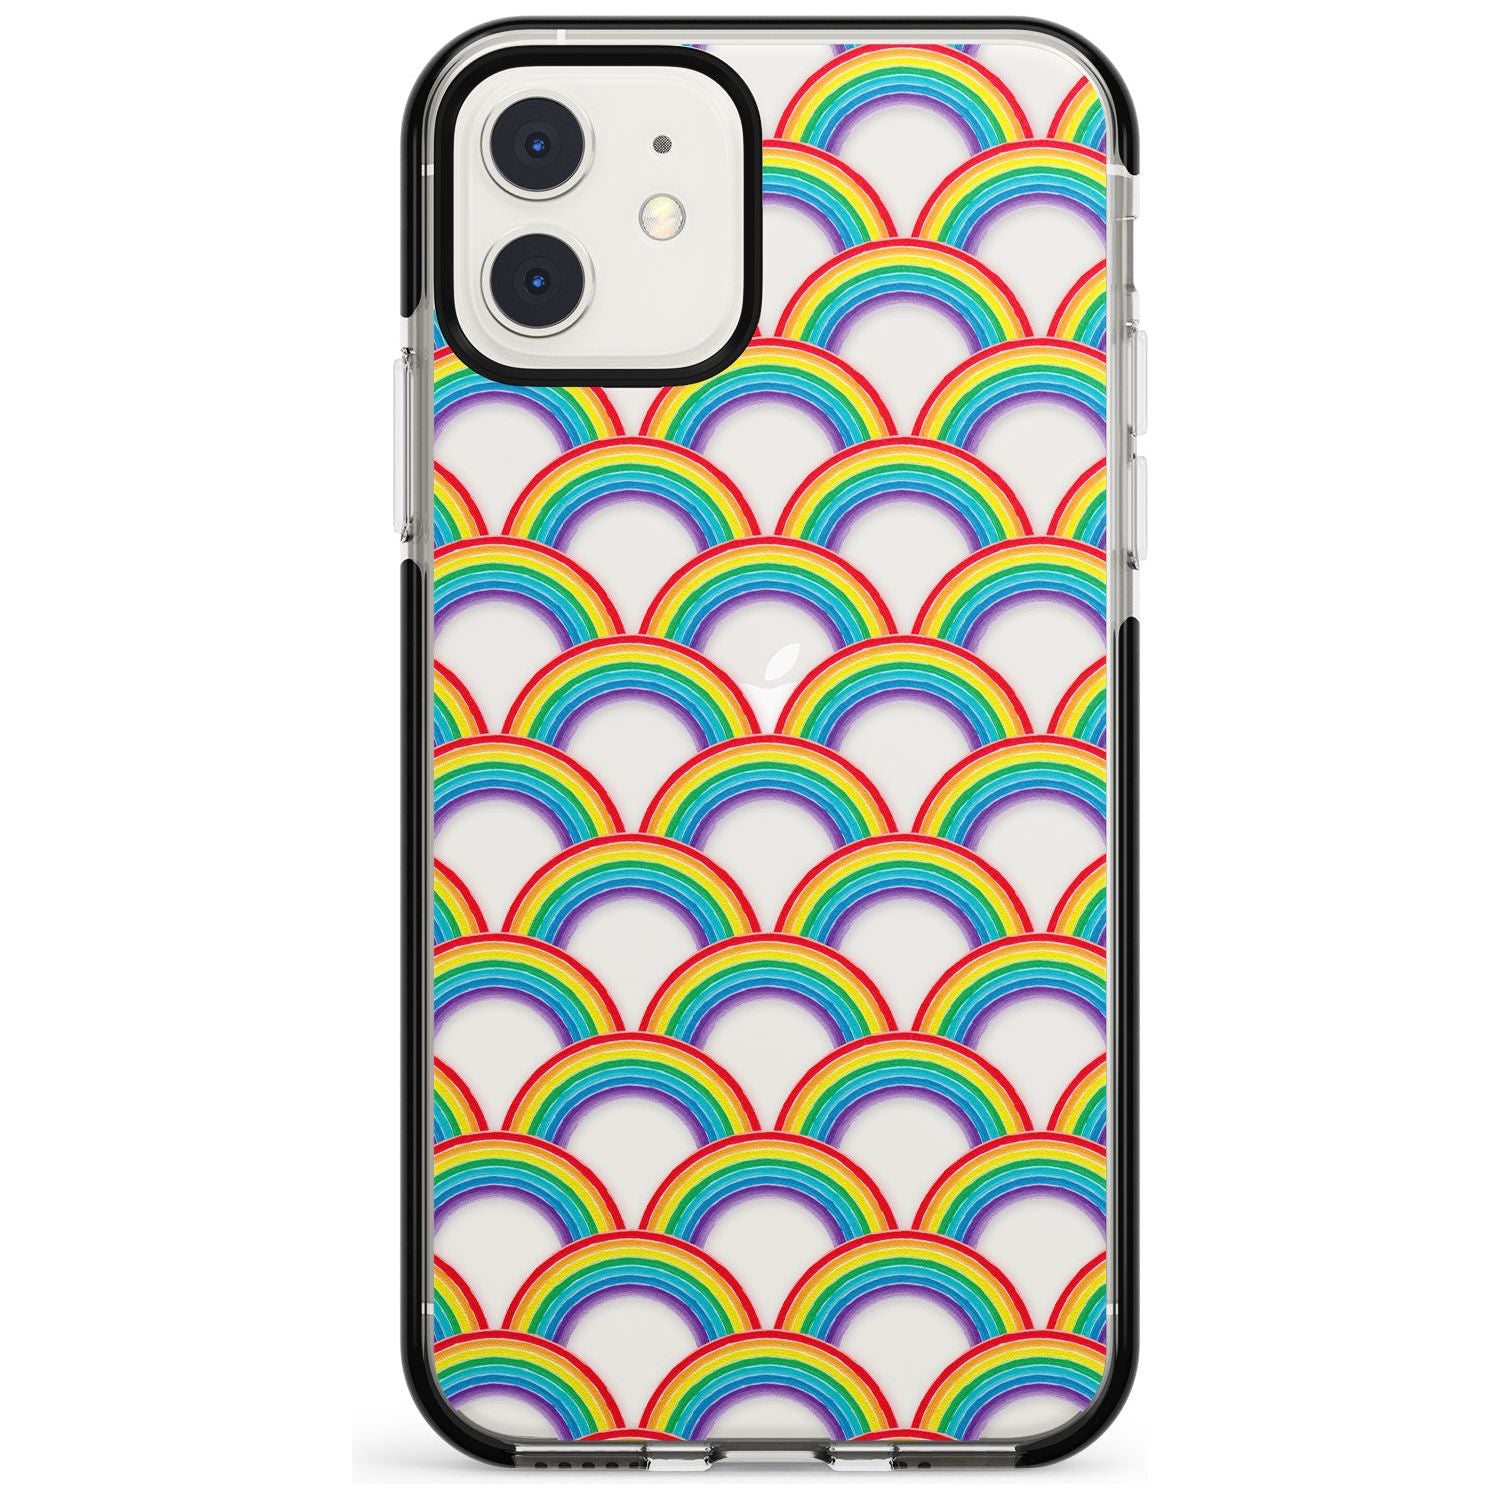 Somewhere over the rainbow Black Impact Phone Case for iPhone 11